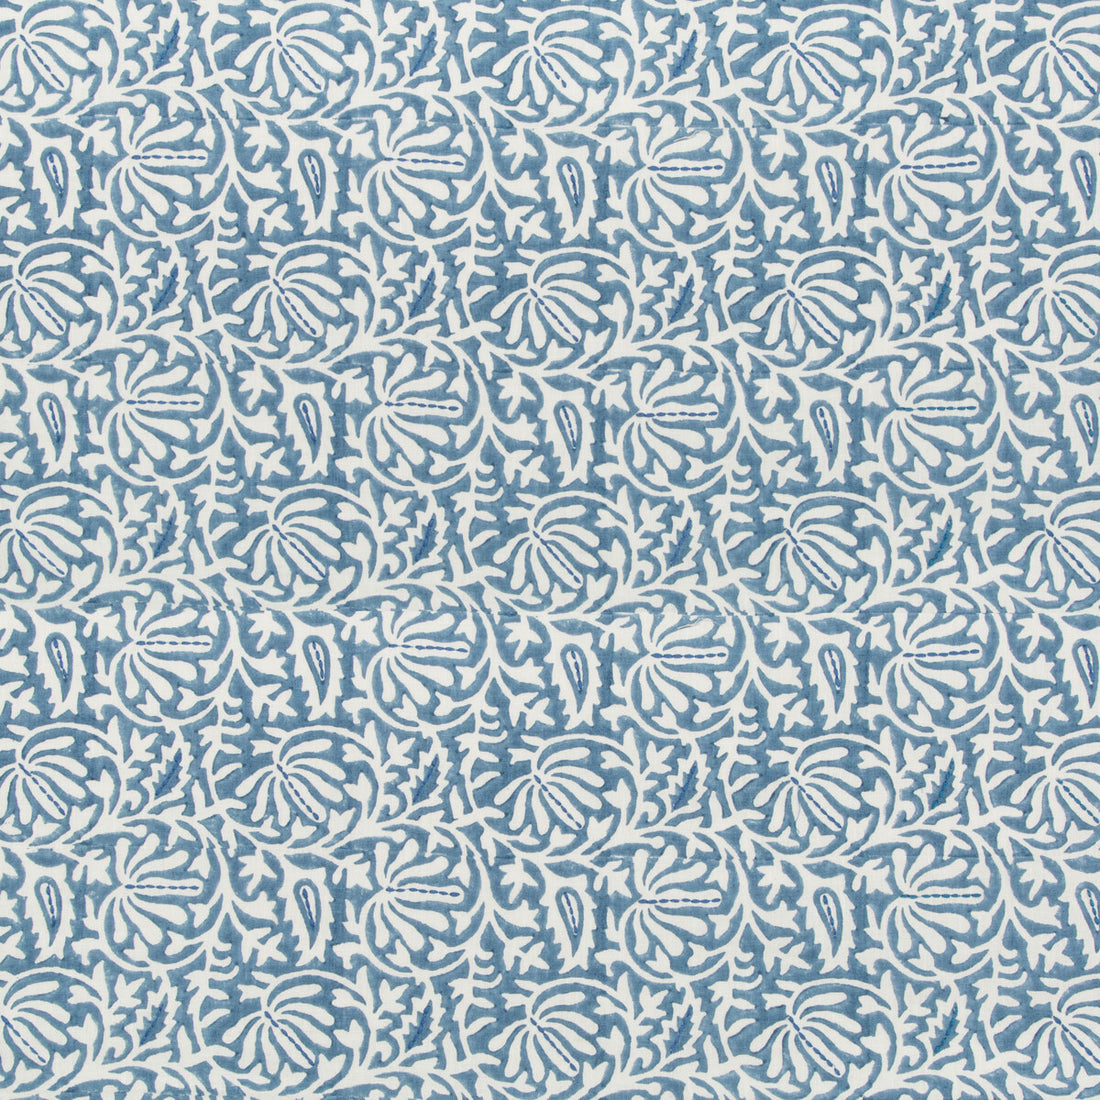 Laine Print fabric in bluebell color - pattern 2017169.5.0 - by Lee Jofa in the Westport collection